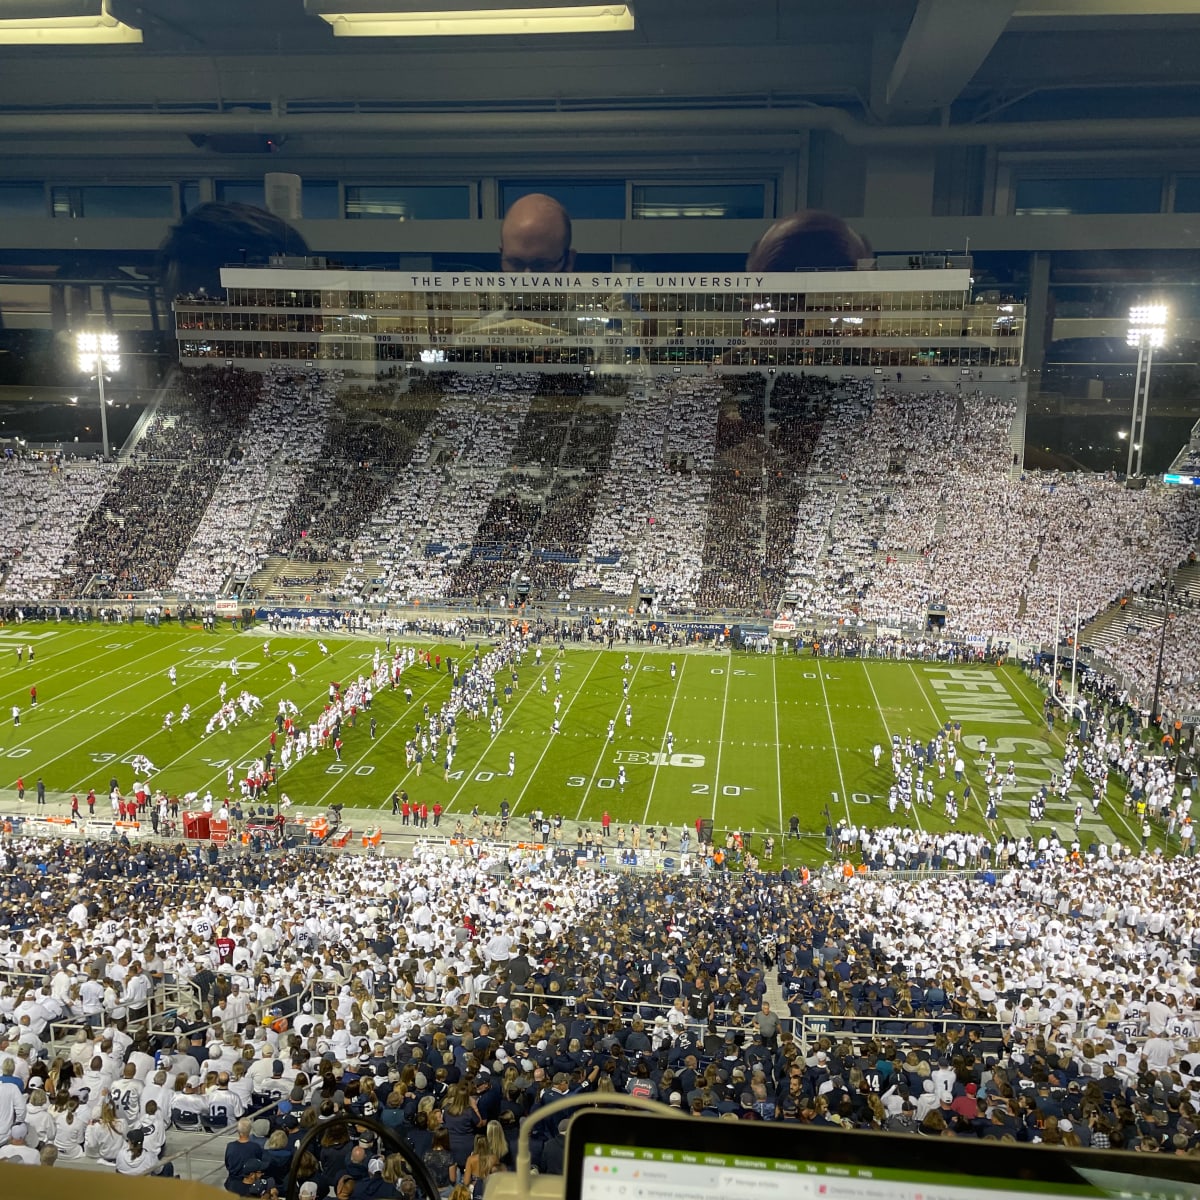 LIVE BLOG Follow Indianas Game With Penn State in Real Time